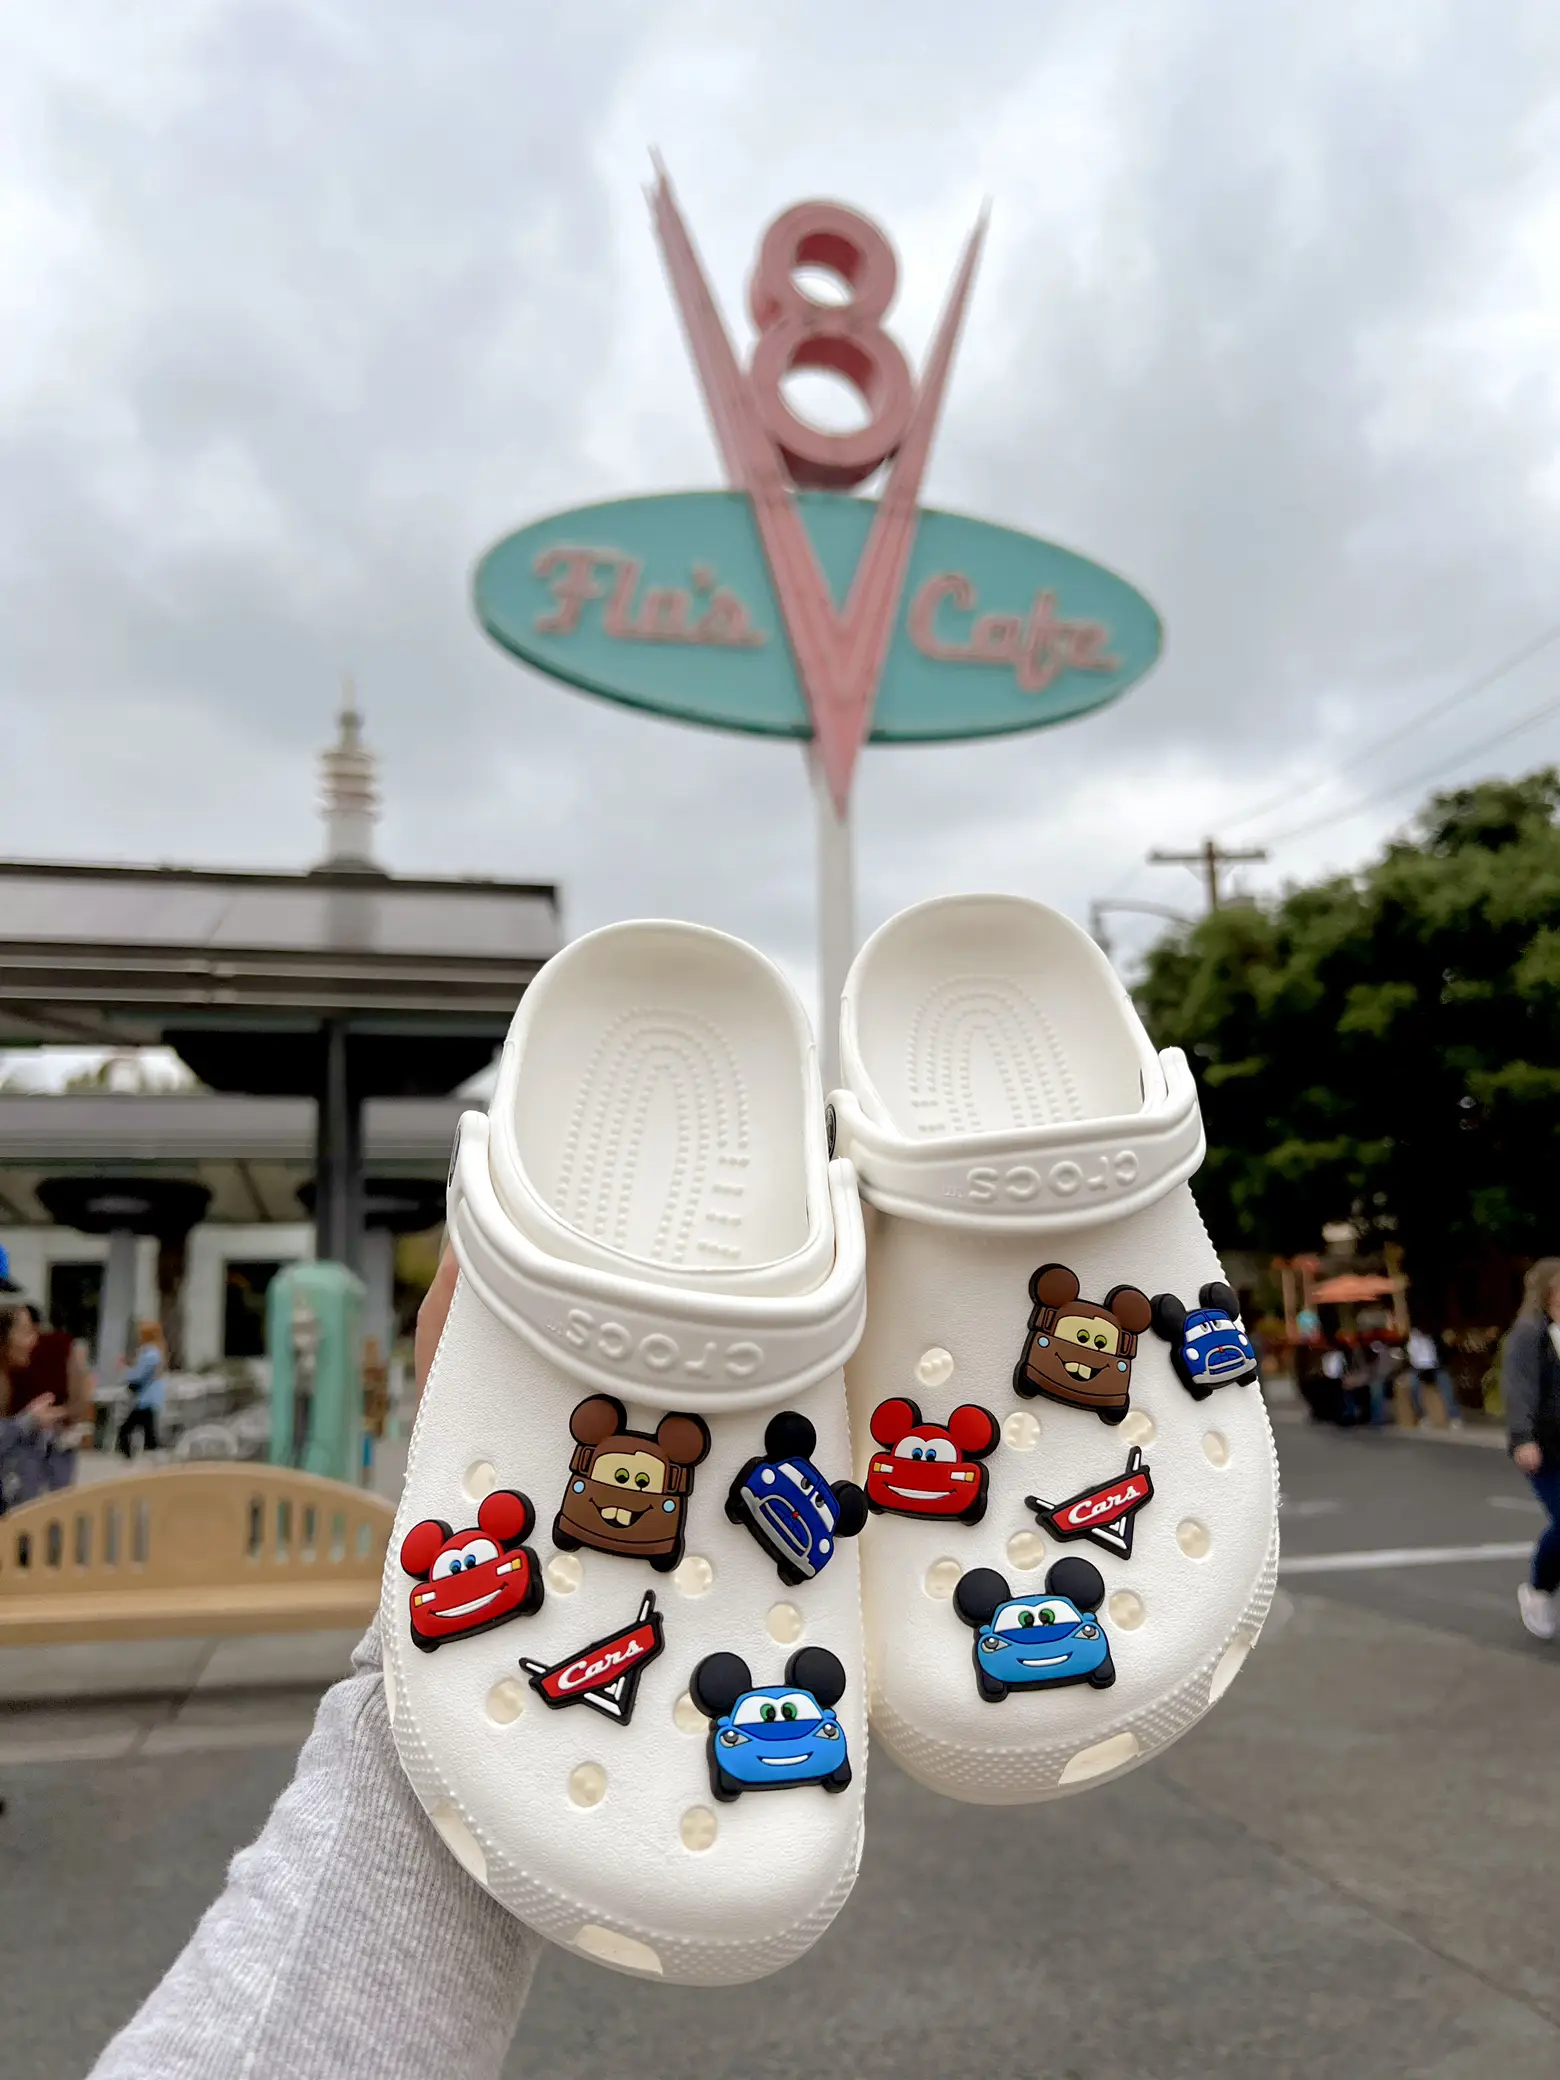 Cars croc charms at Disneyland, Gallery posted by Rebecca